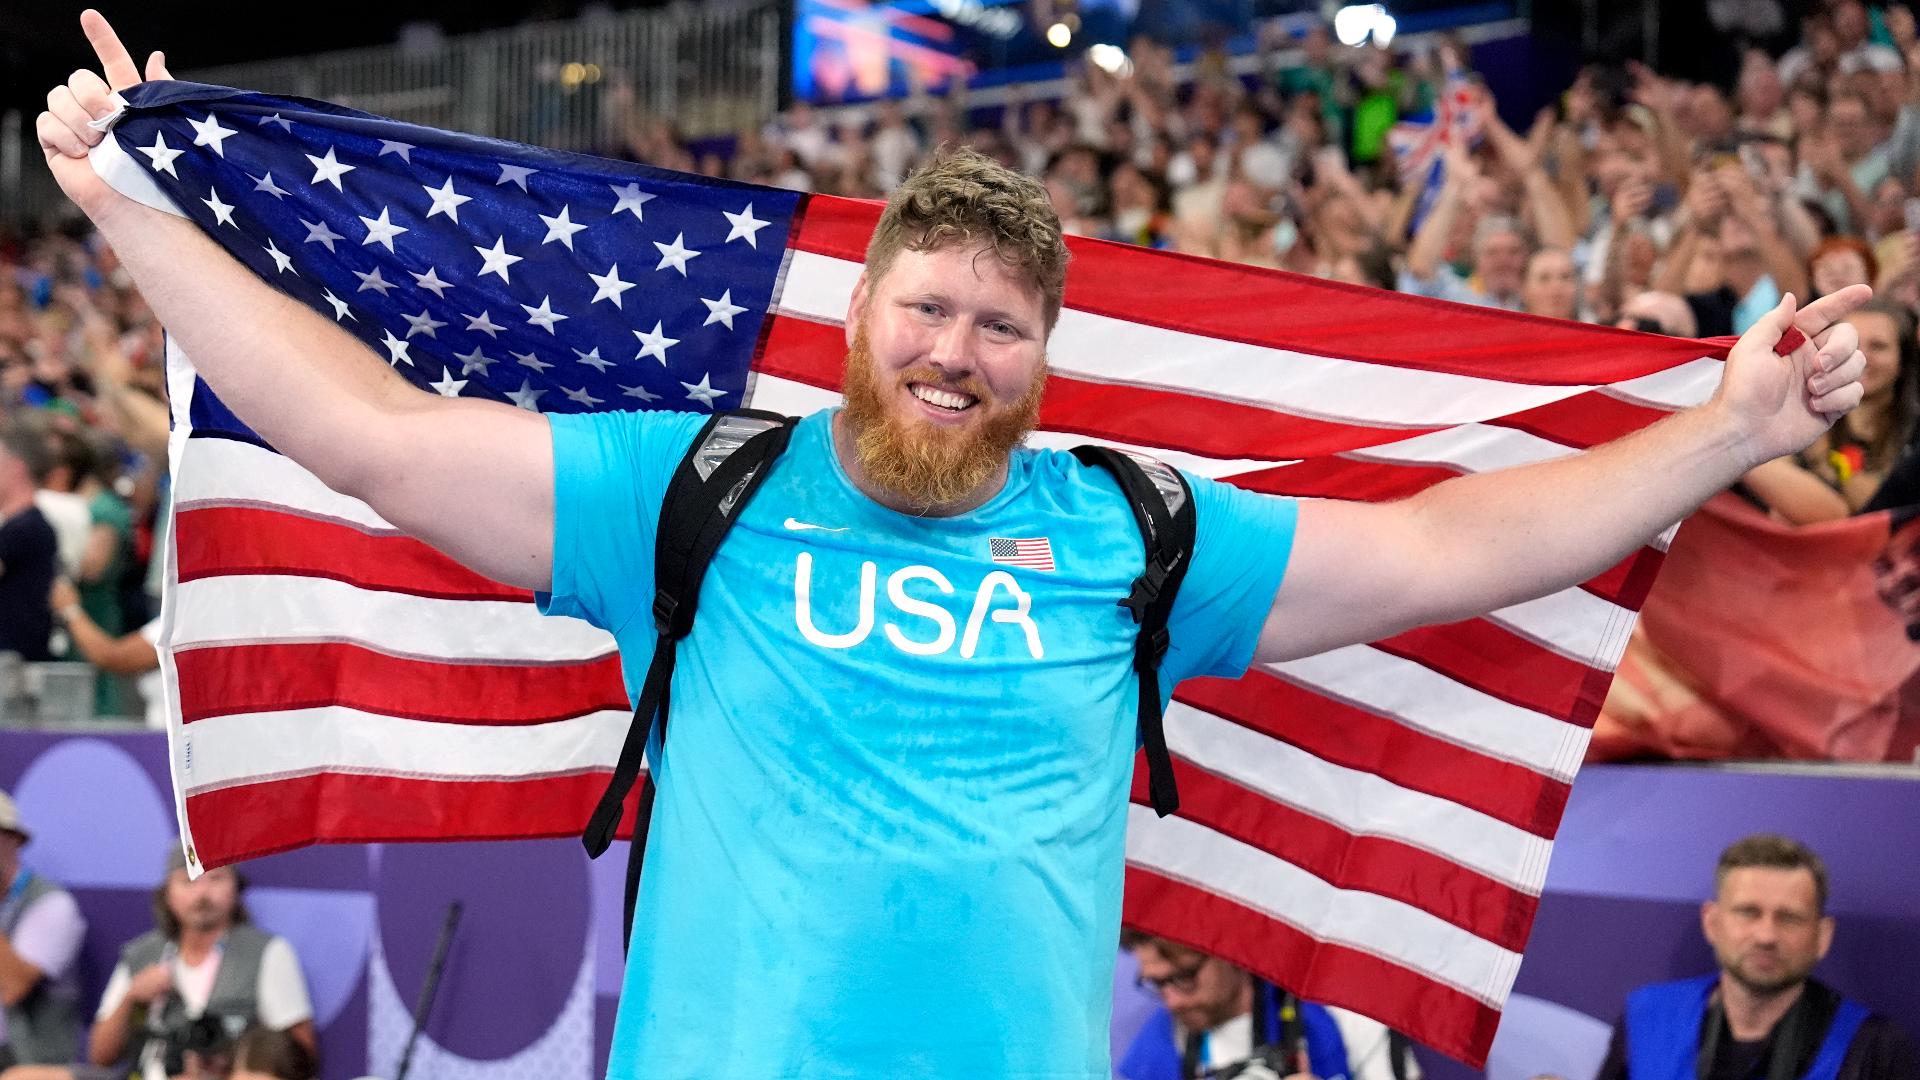 Crouser took home gold in shot put at the Paris Olympics. It's his third summer Olympics in a row, and he won gold all three times.